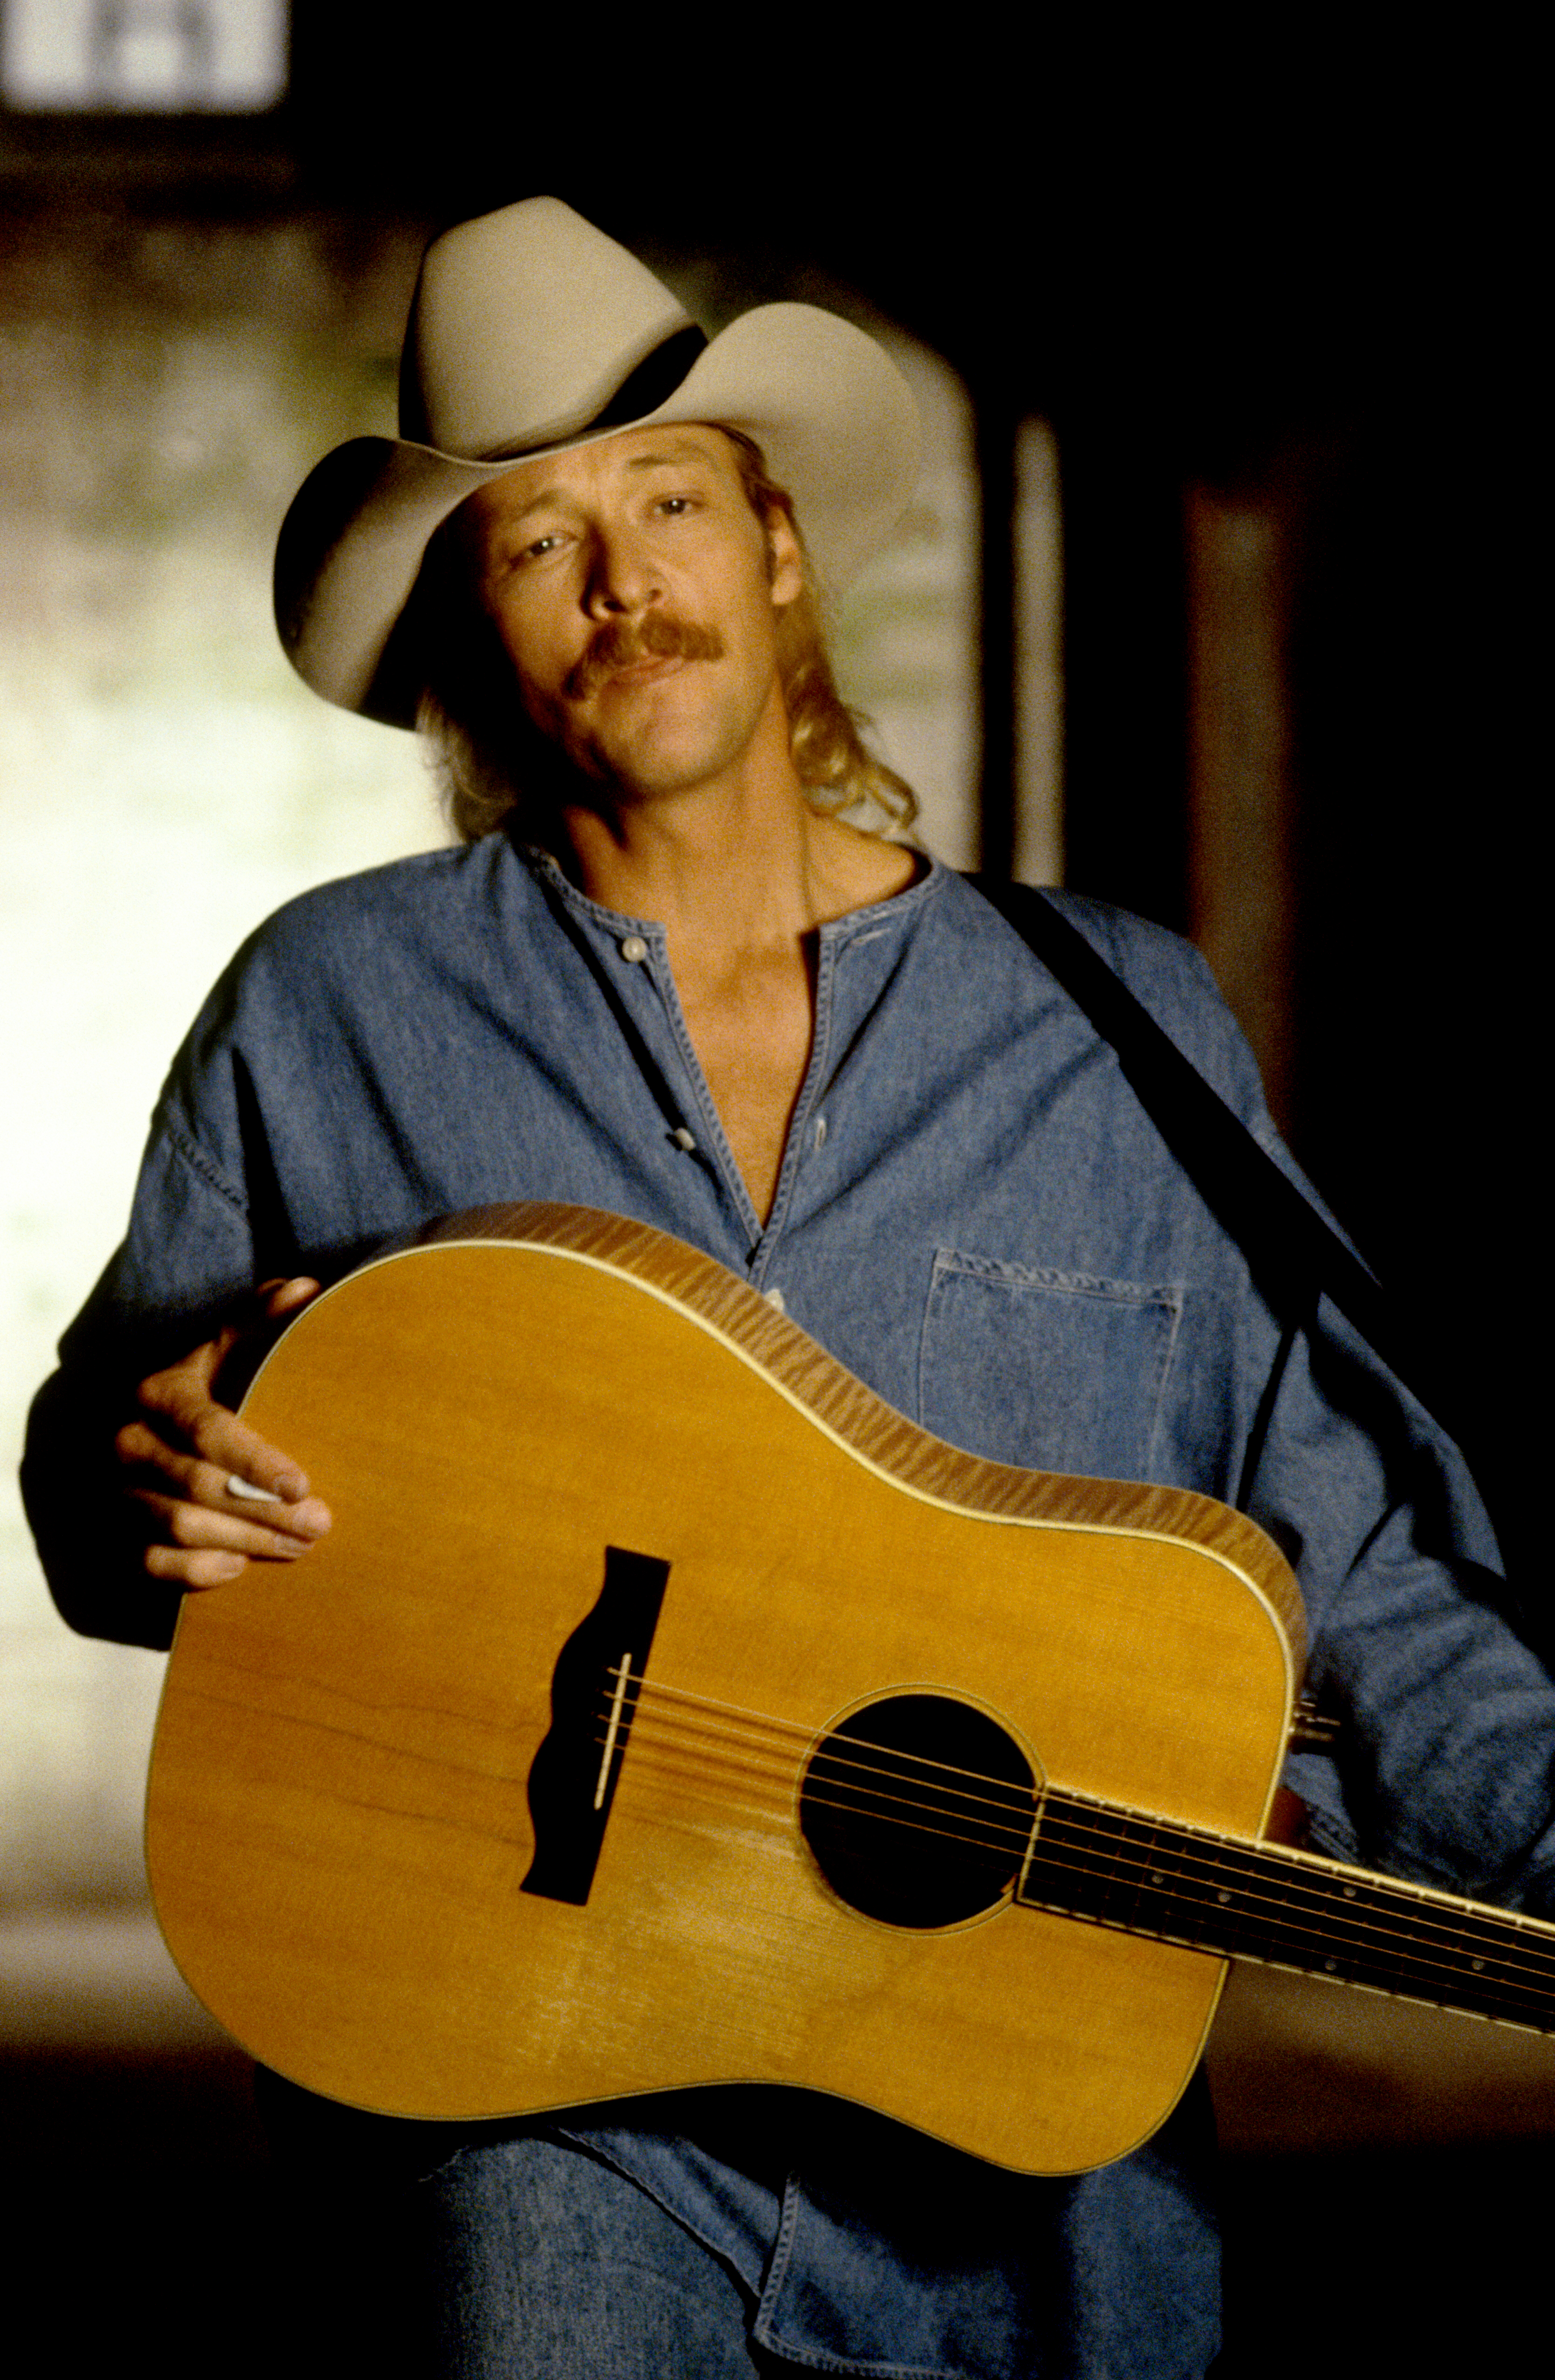 Alan Jackson performs in his music video "I Don't Even Know Your Name," circa 1994 | Source: Getty Images